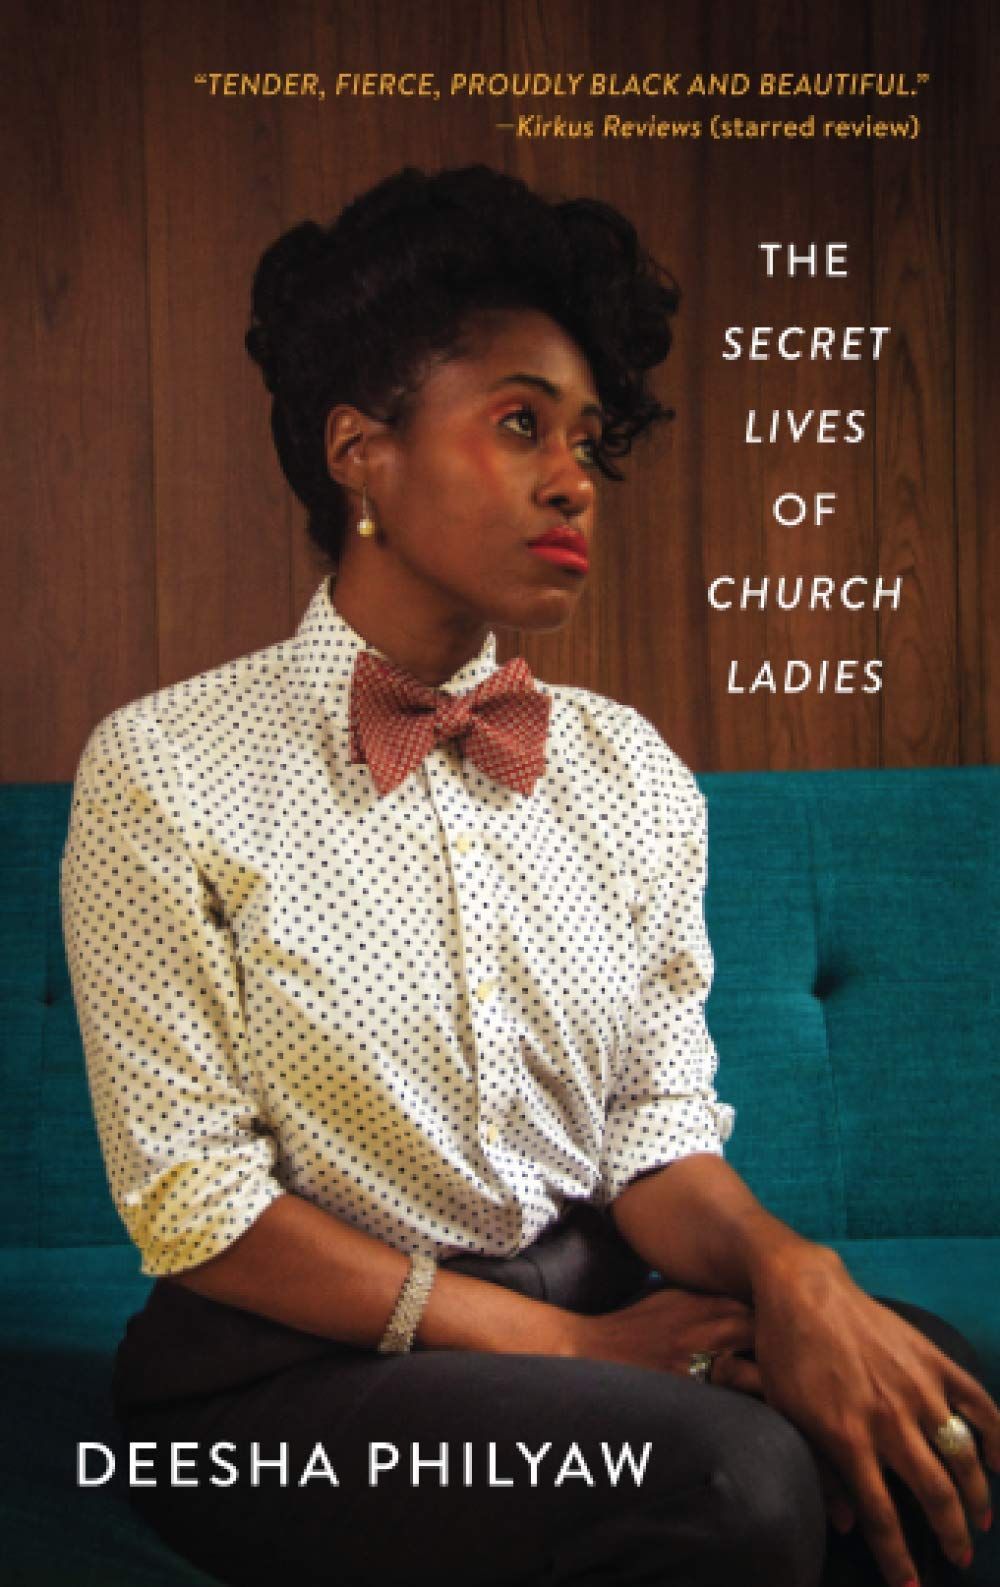 Strong and Certain: On Deesha Philyaw’s “The Secret Lives of Church Ladies”